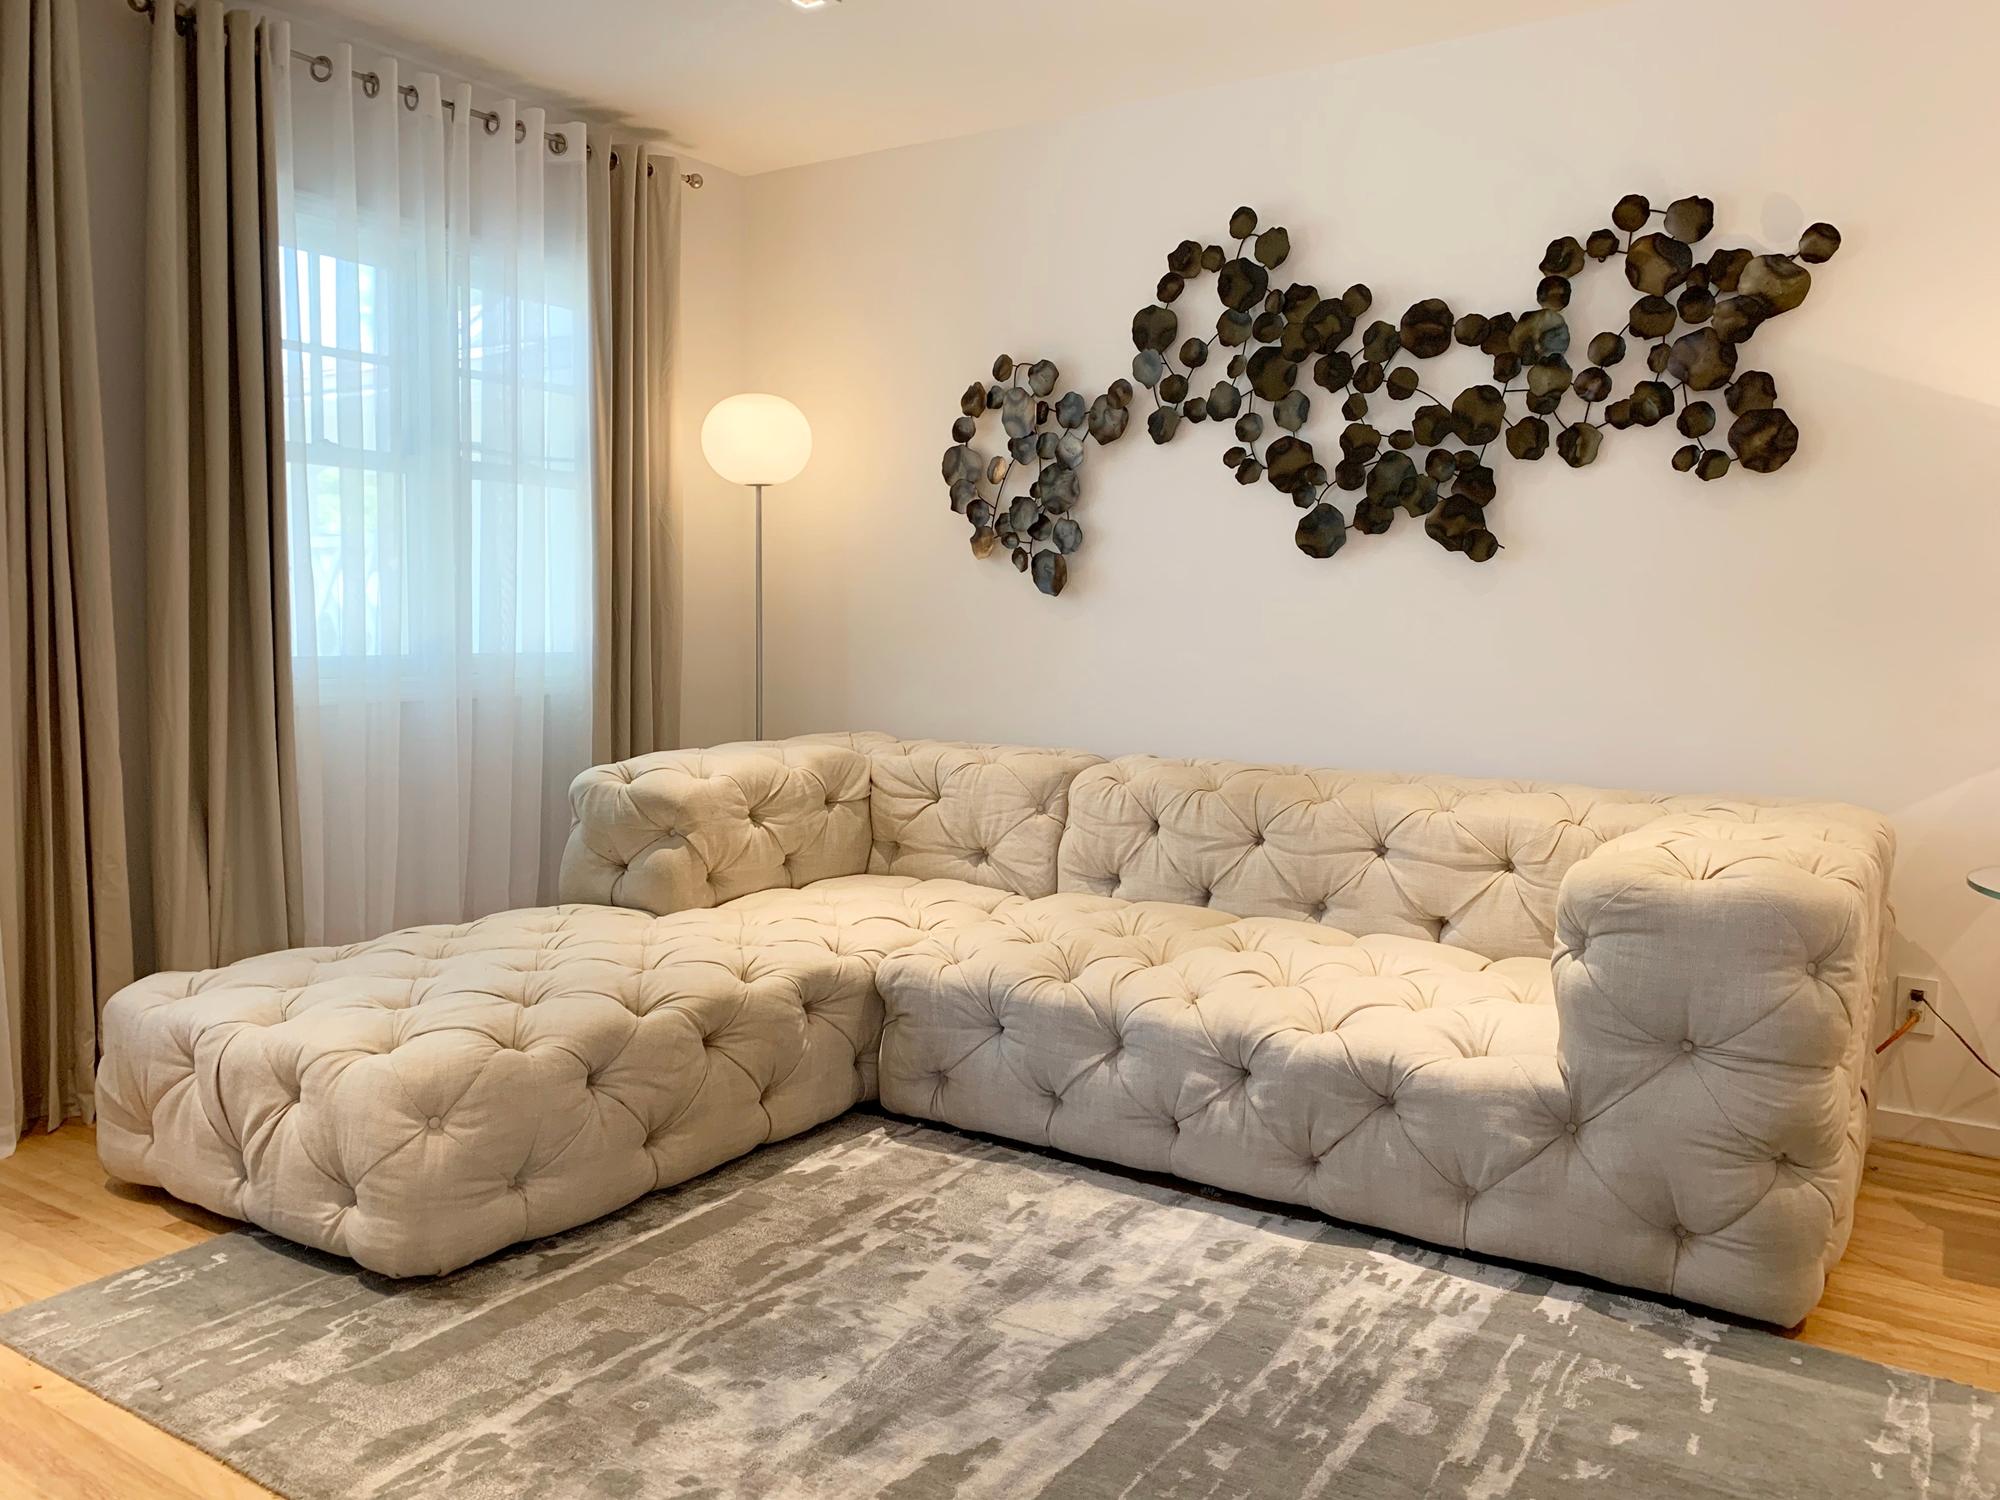 tufted sectional sofa